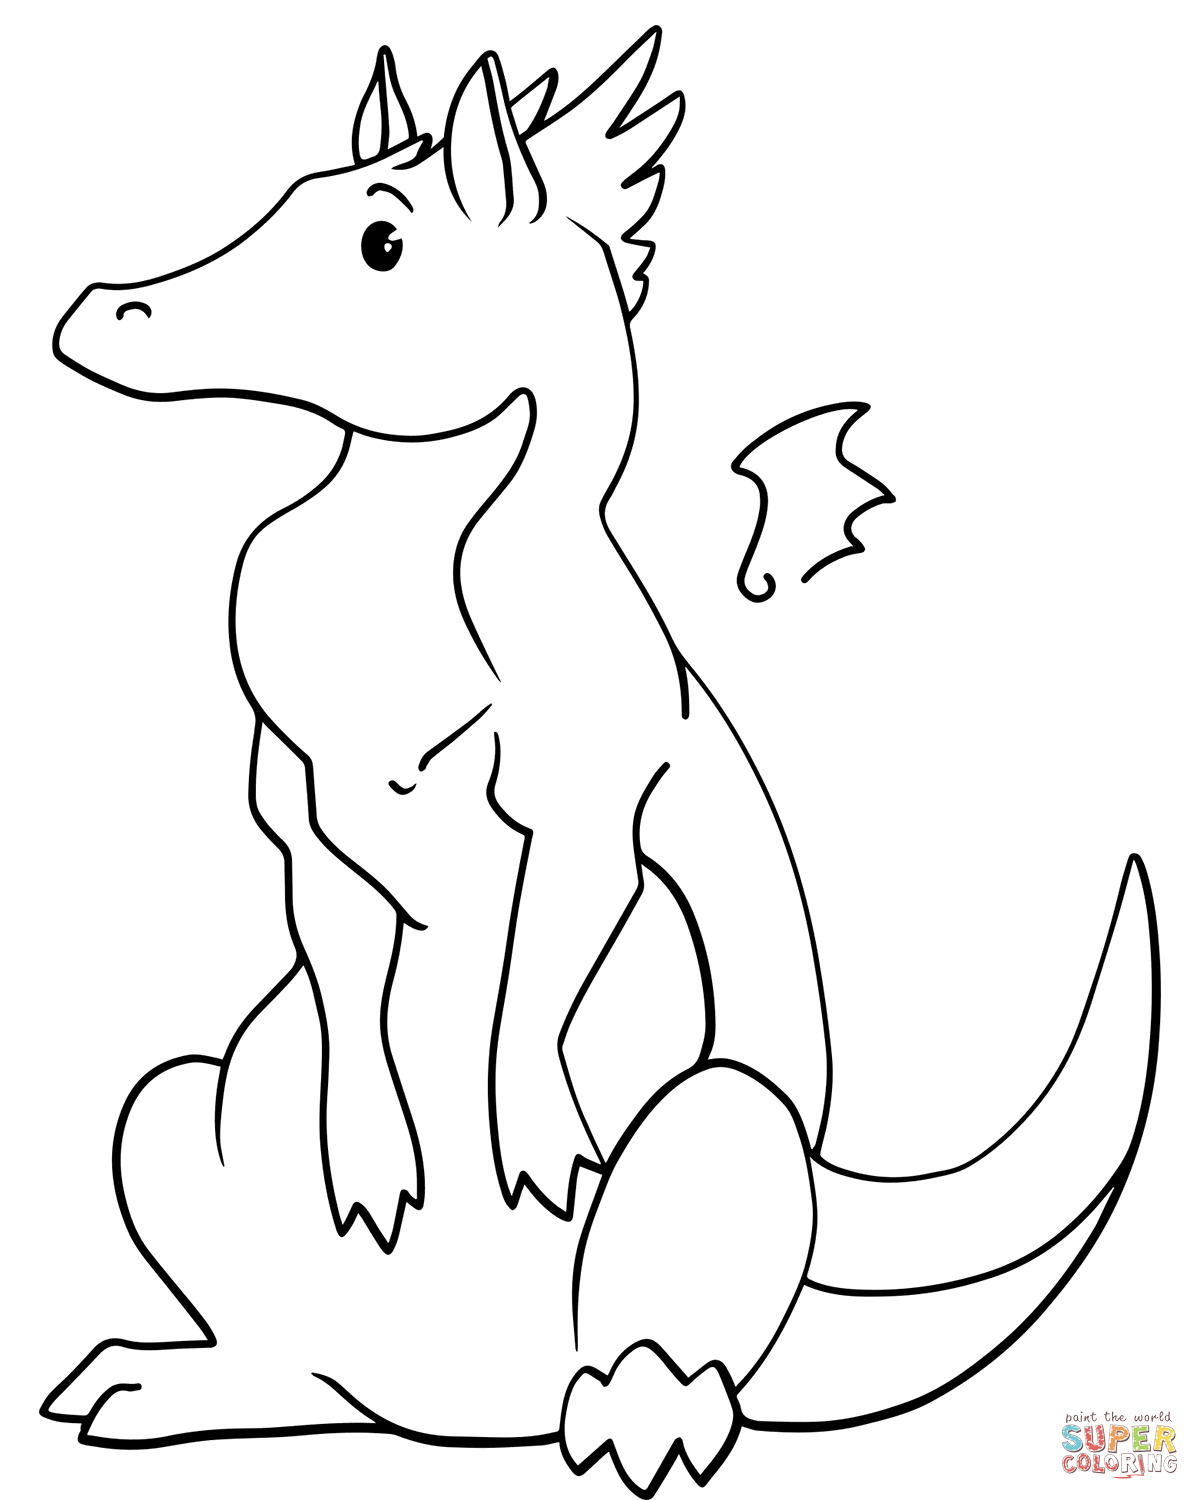 Cartoon dragon coloring page free printable coloring pages